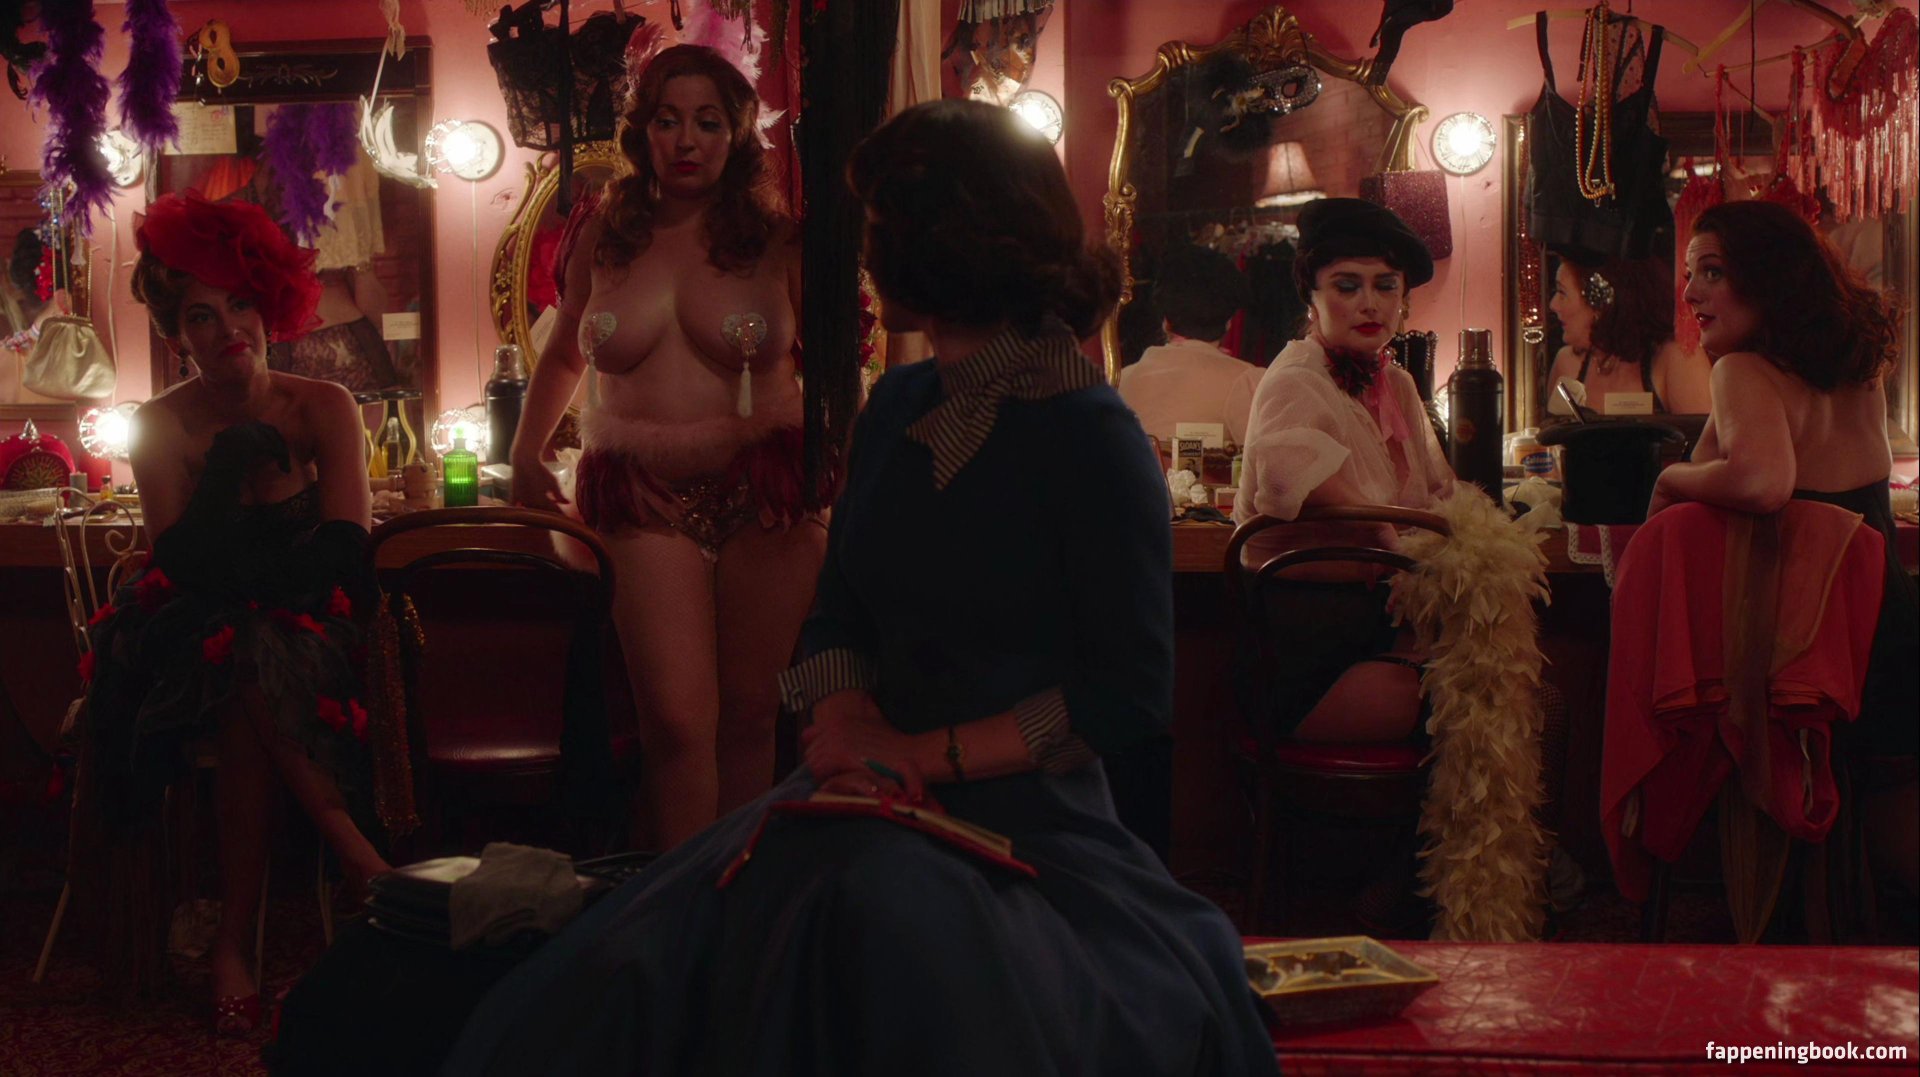 Nude Roles in Movies: The Marvelous Mrs. Maisel (2017